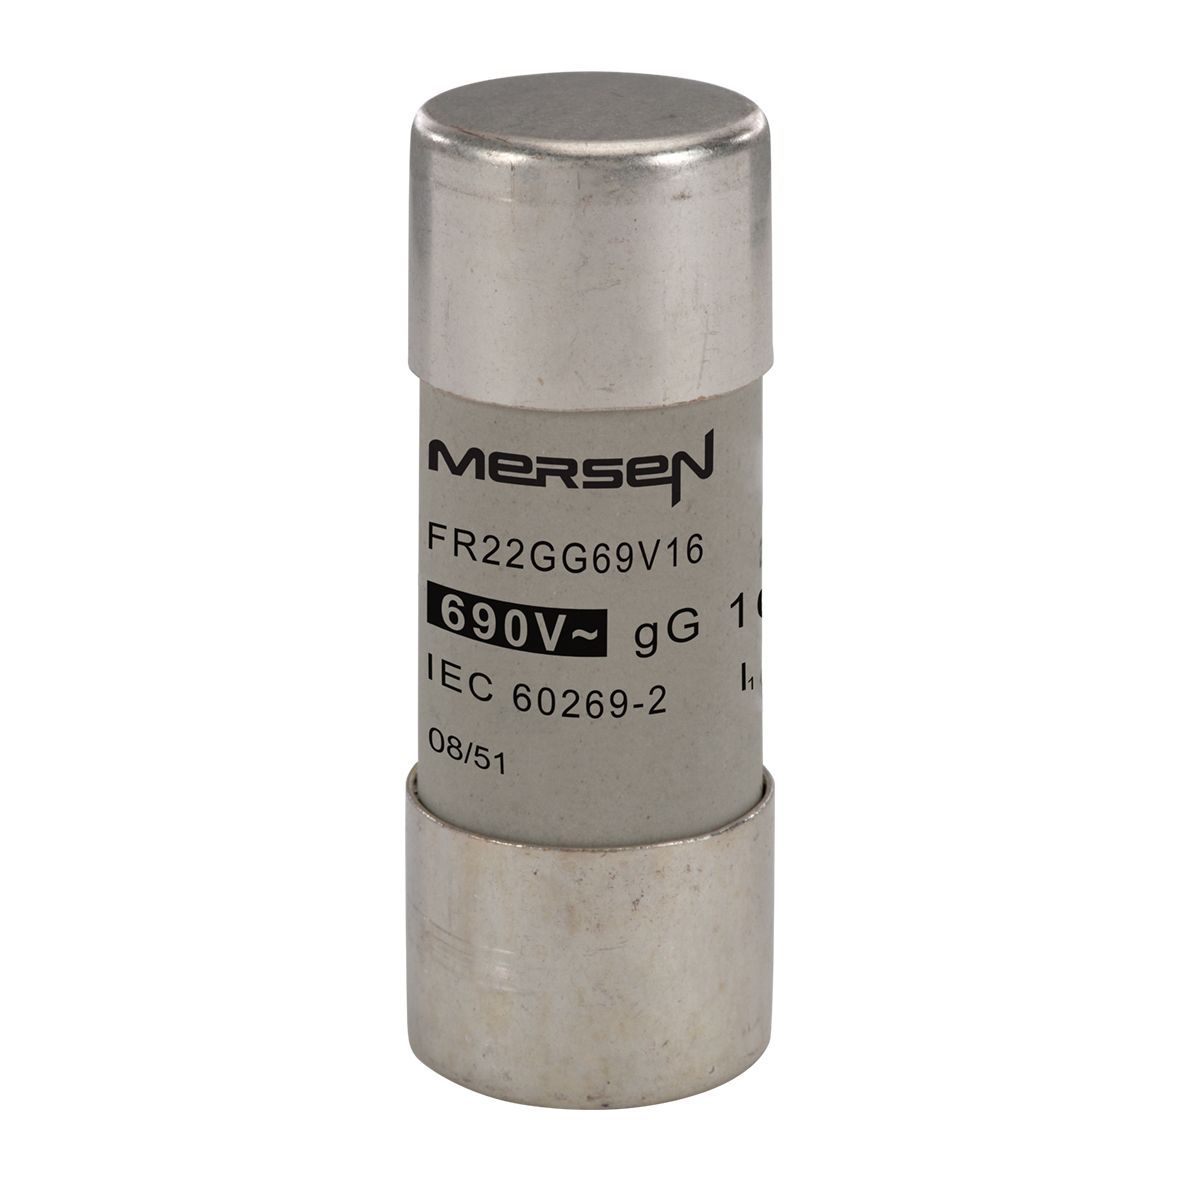 S201818 - Cylindrical fuse-link gG 690VAC 22.2x58, 16A